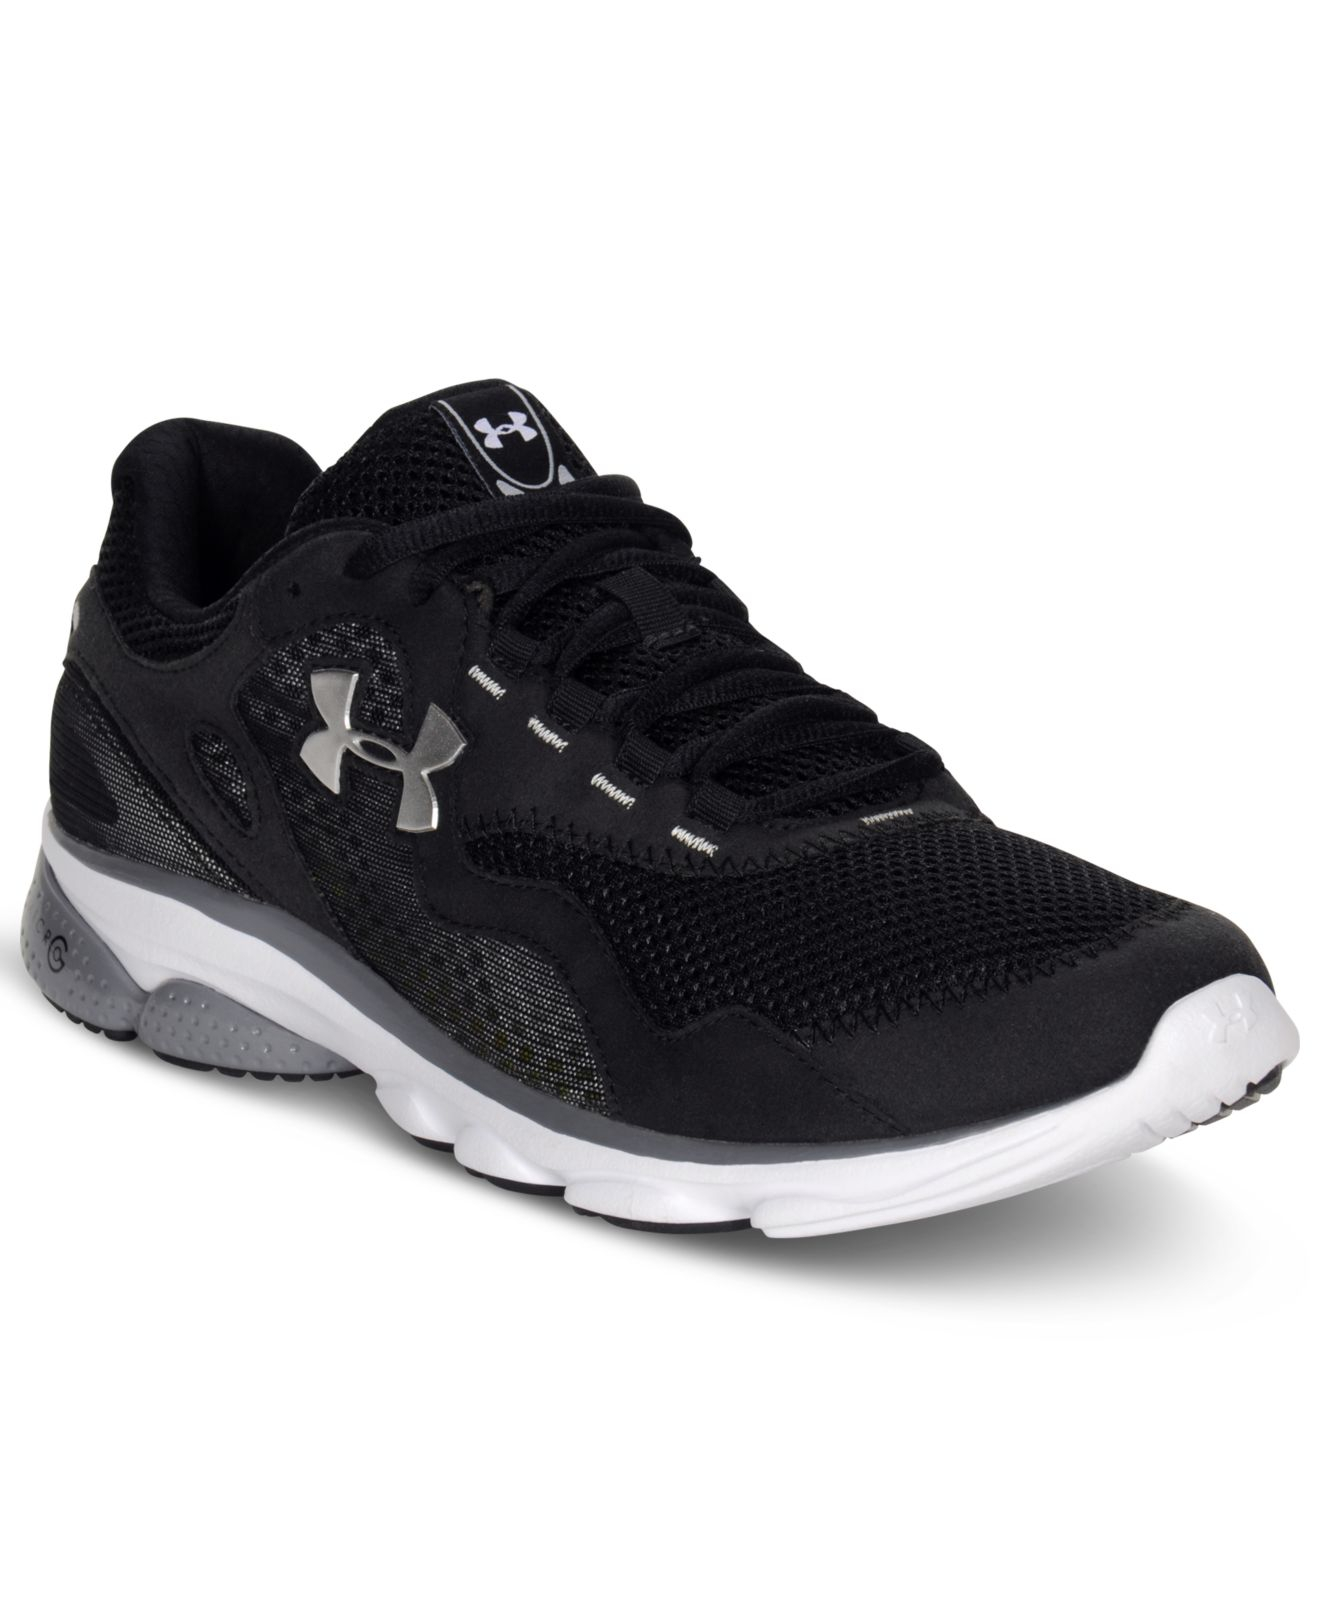 Lyst - Under Armour Men'S Assert Iii Sneakers From Finish Line for Men